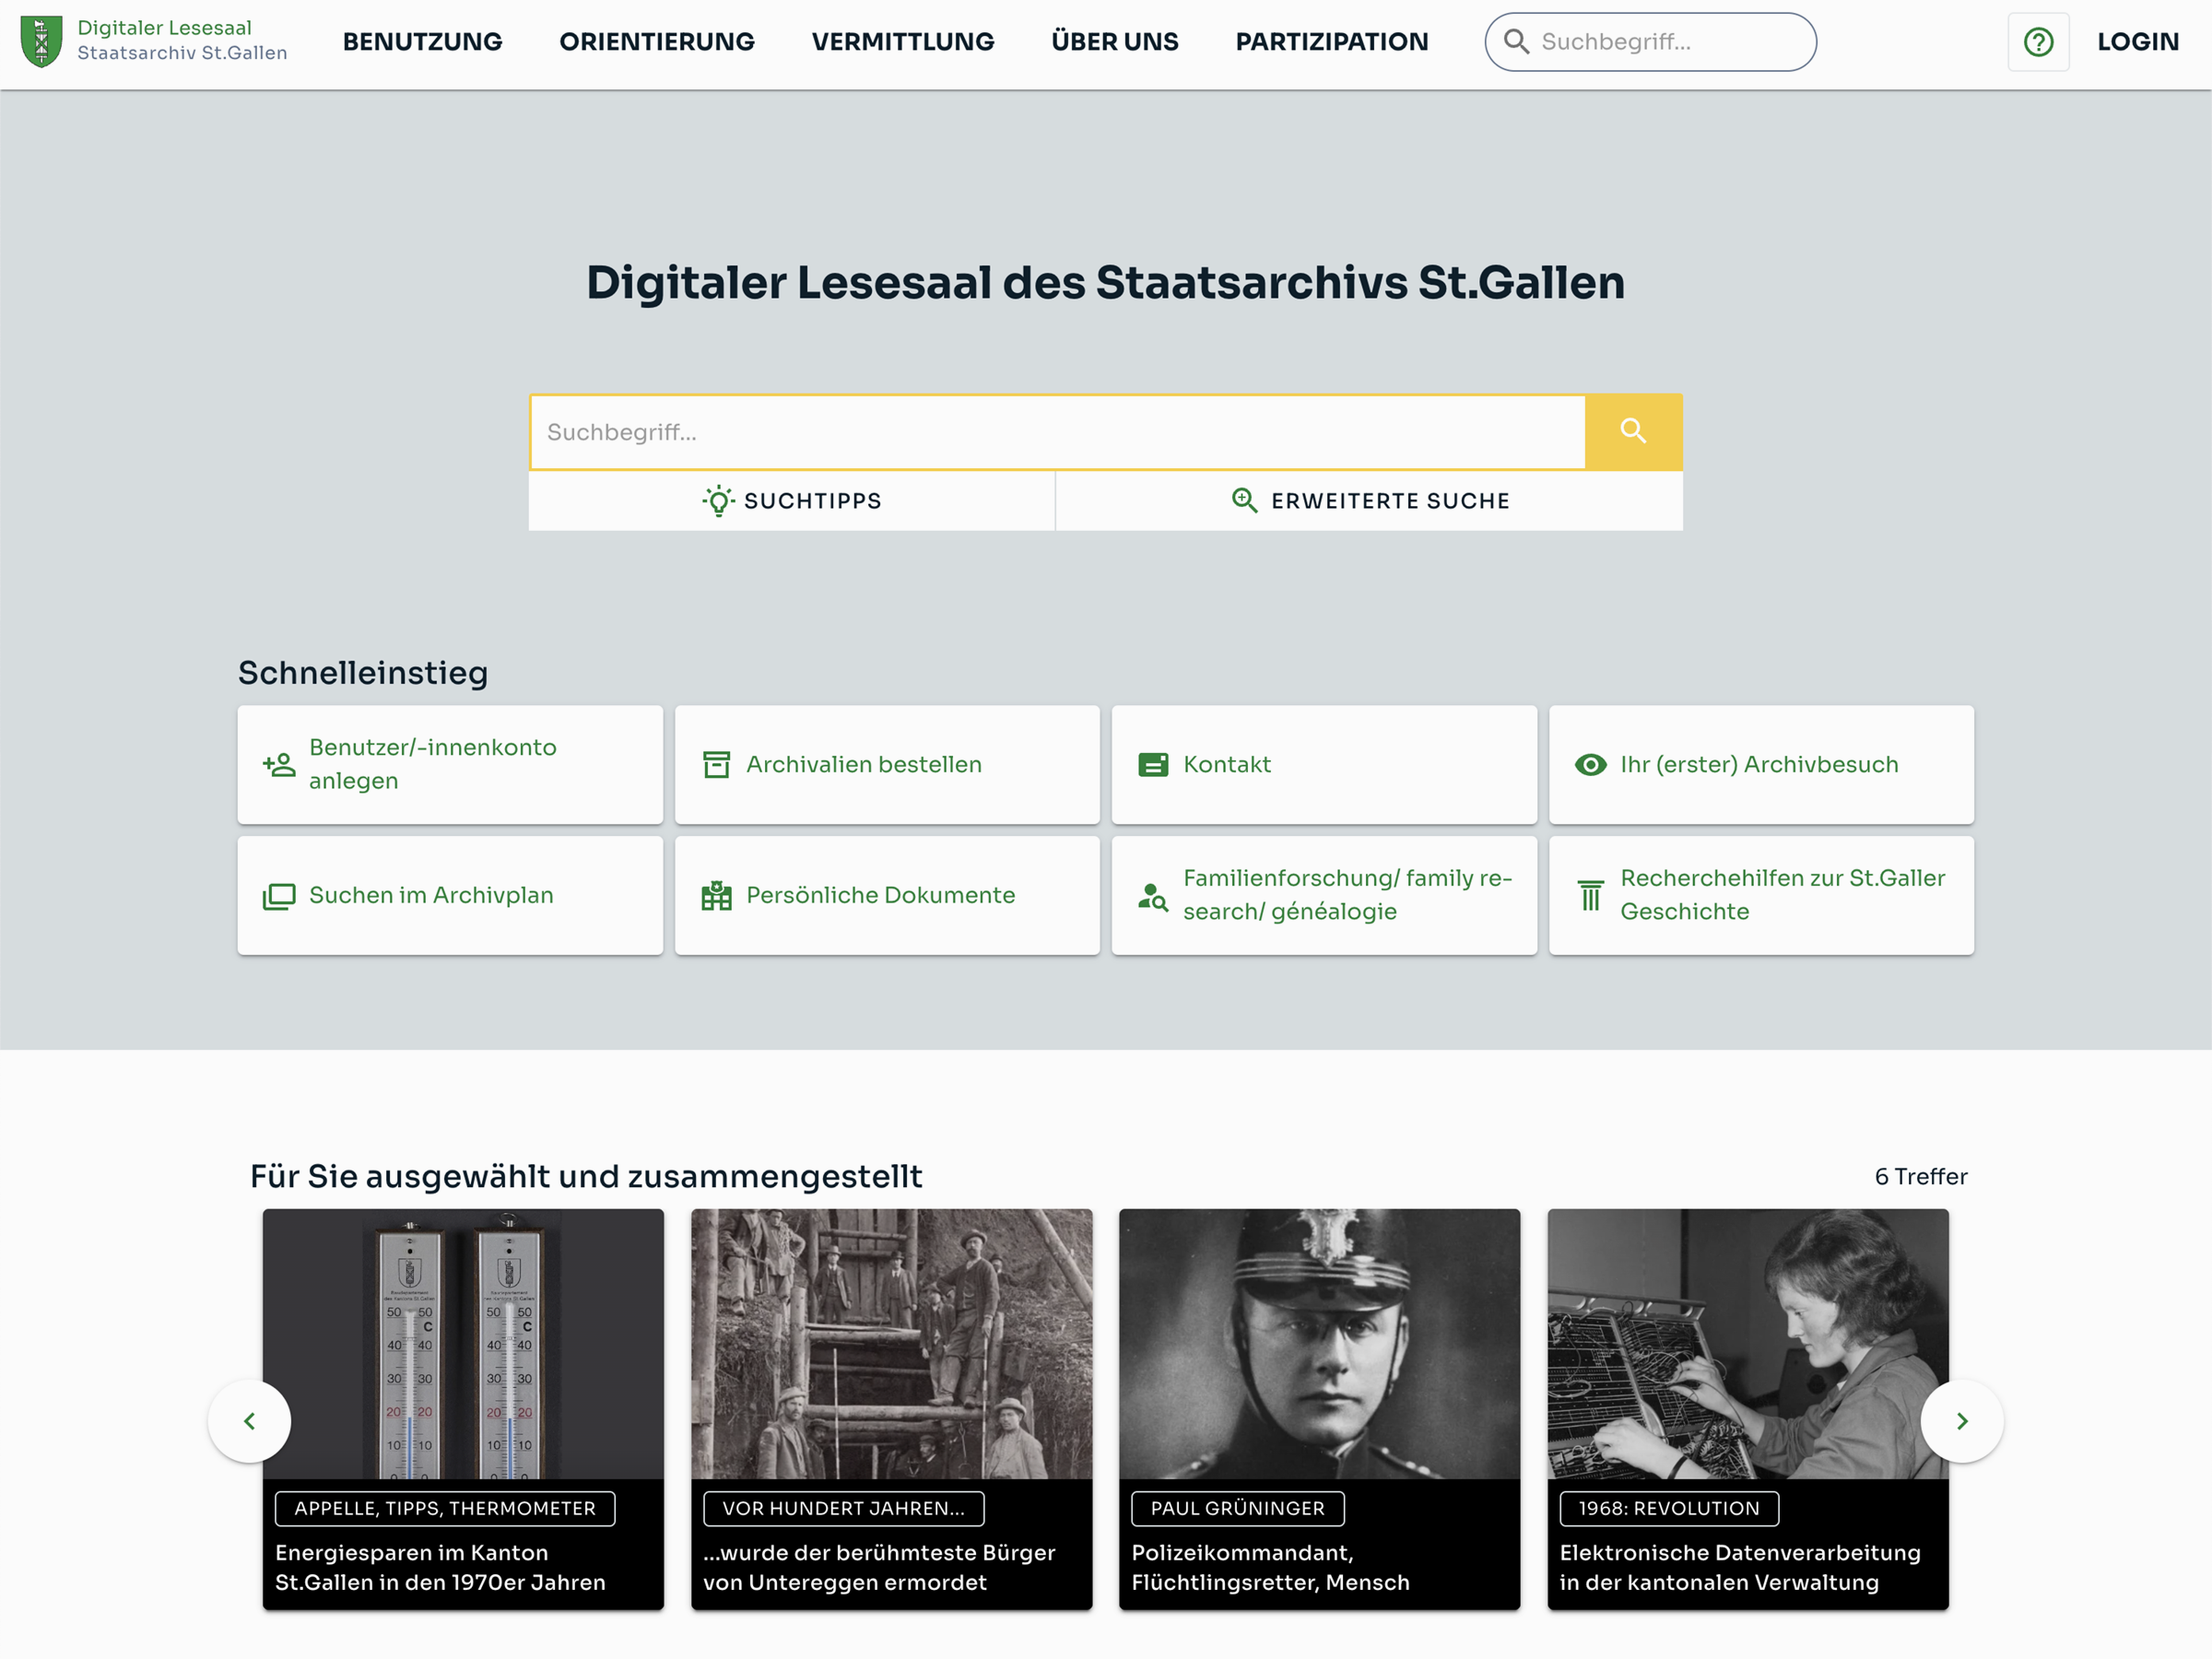 Screenshot ‘Digitaler Lesesaal’ giving users access to the archives.